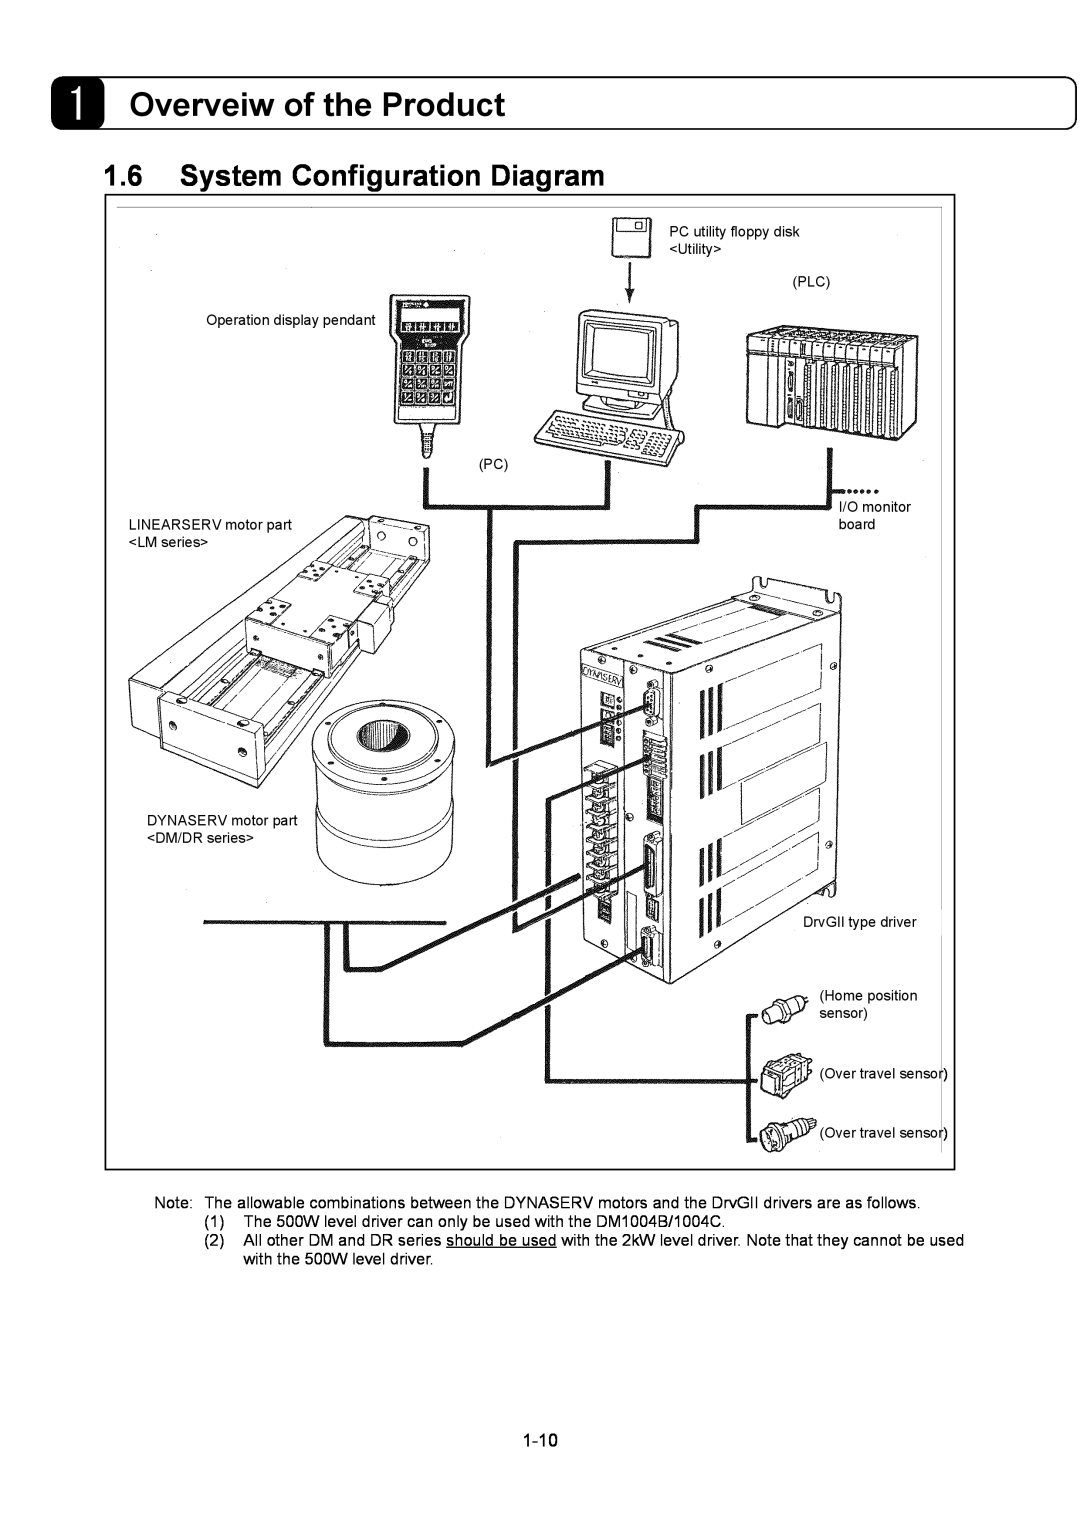 Parker Hannifin G2 manual System Configuration Diagram, Overveiw of the Product, 1-10 